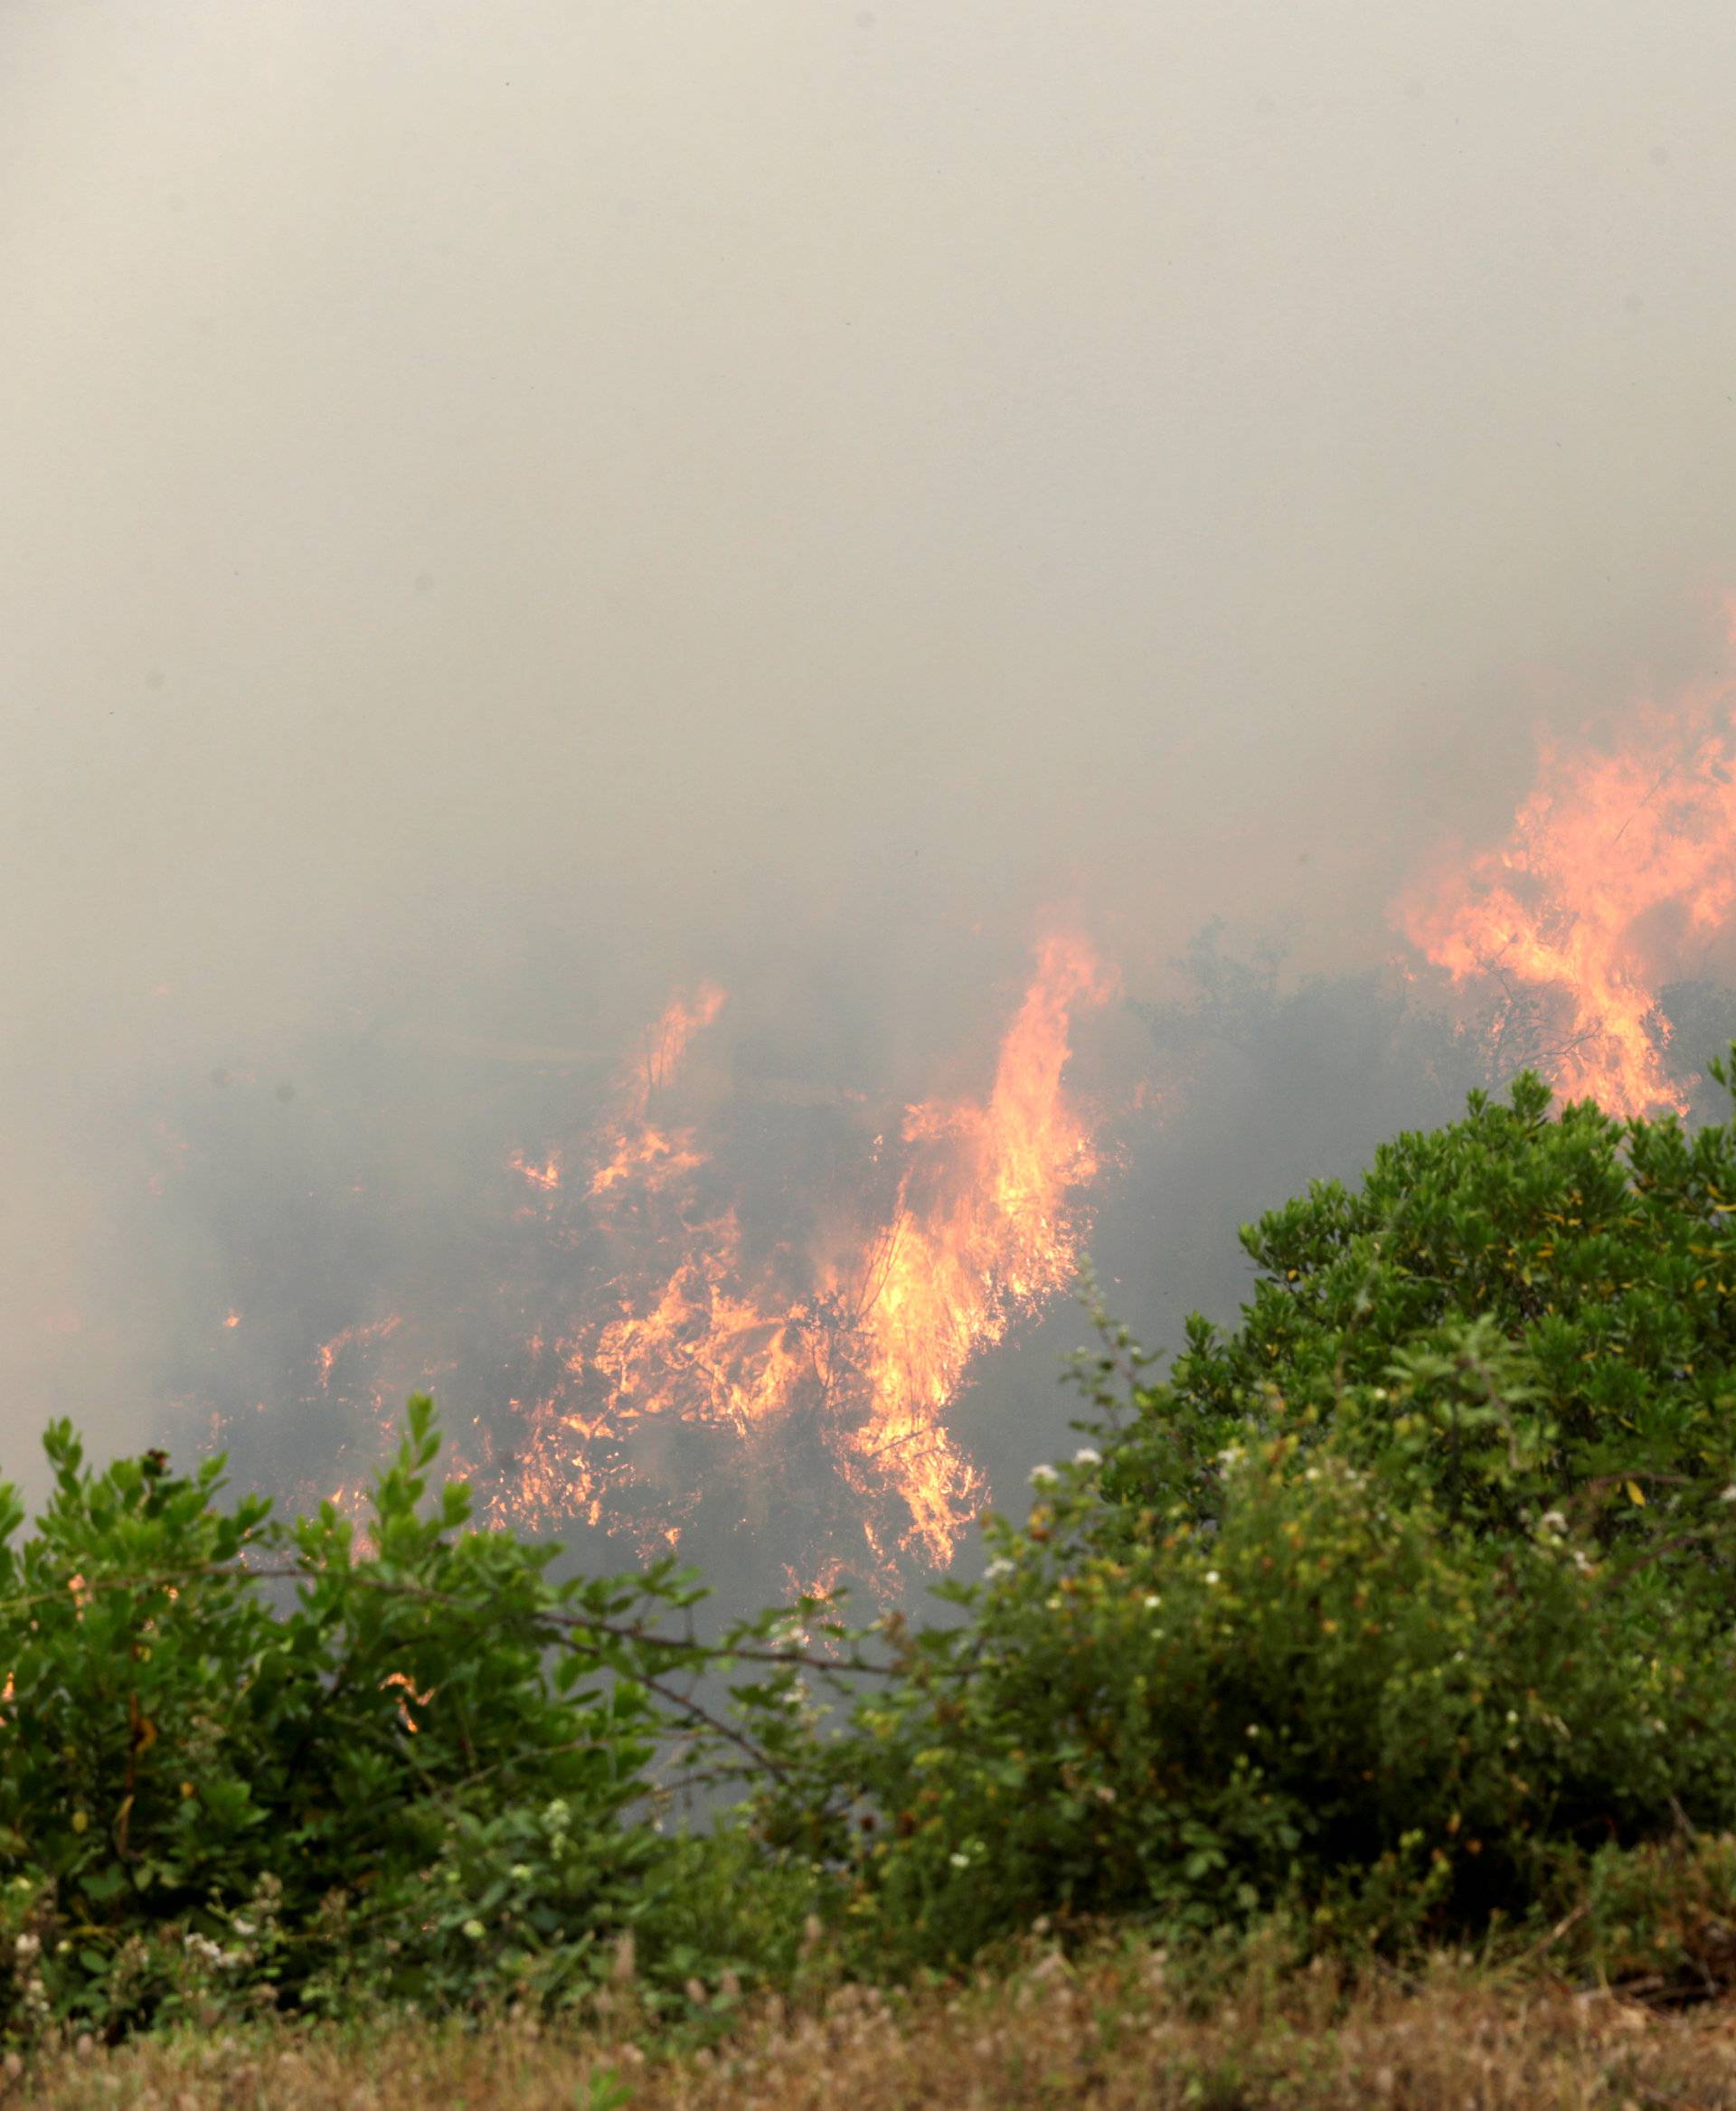 A man looks at fire and smoke during a forest fire in Pedrogao Grande